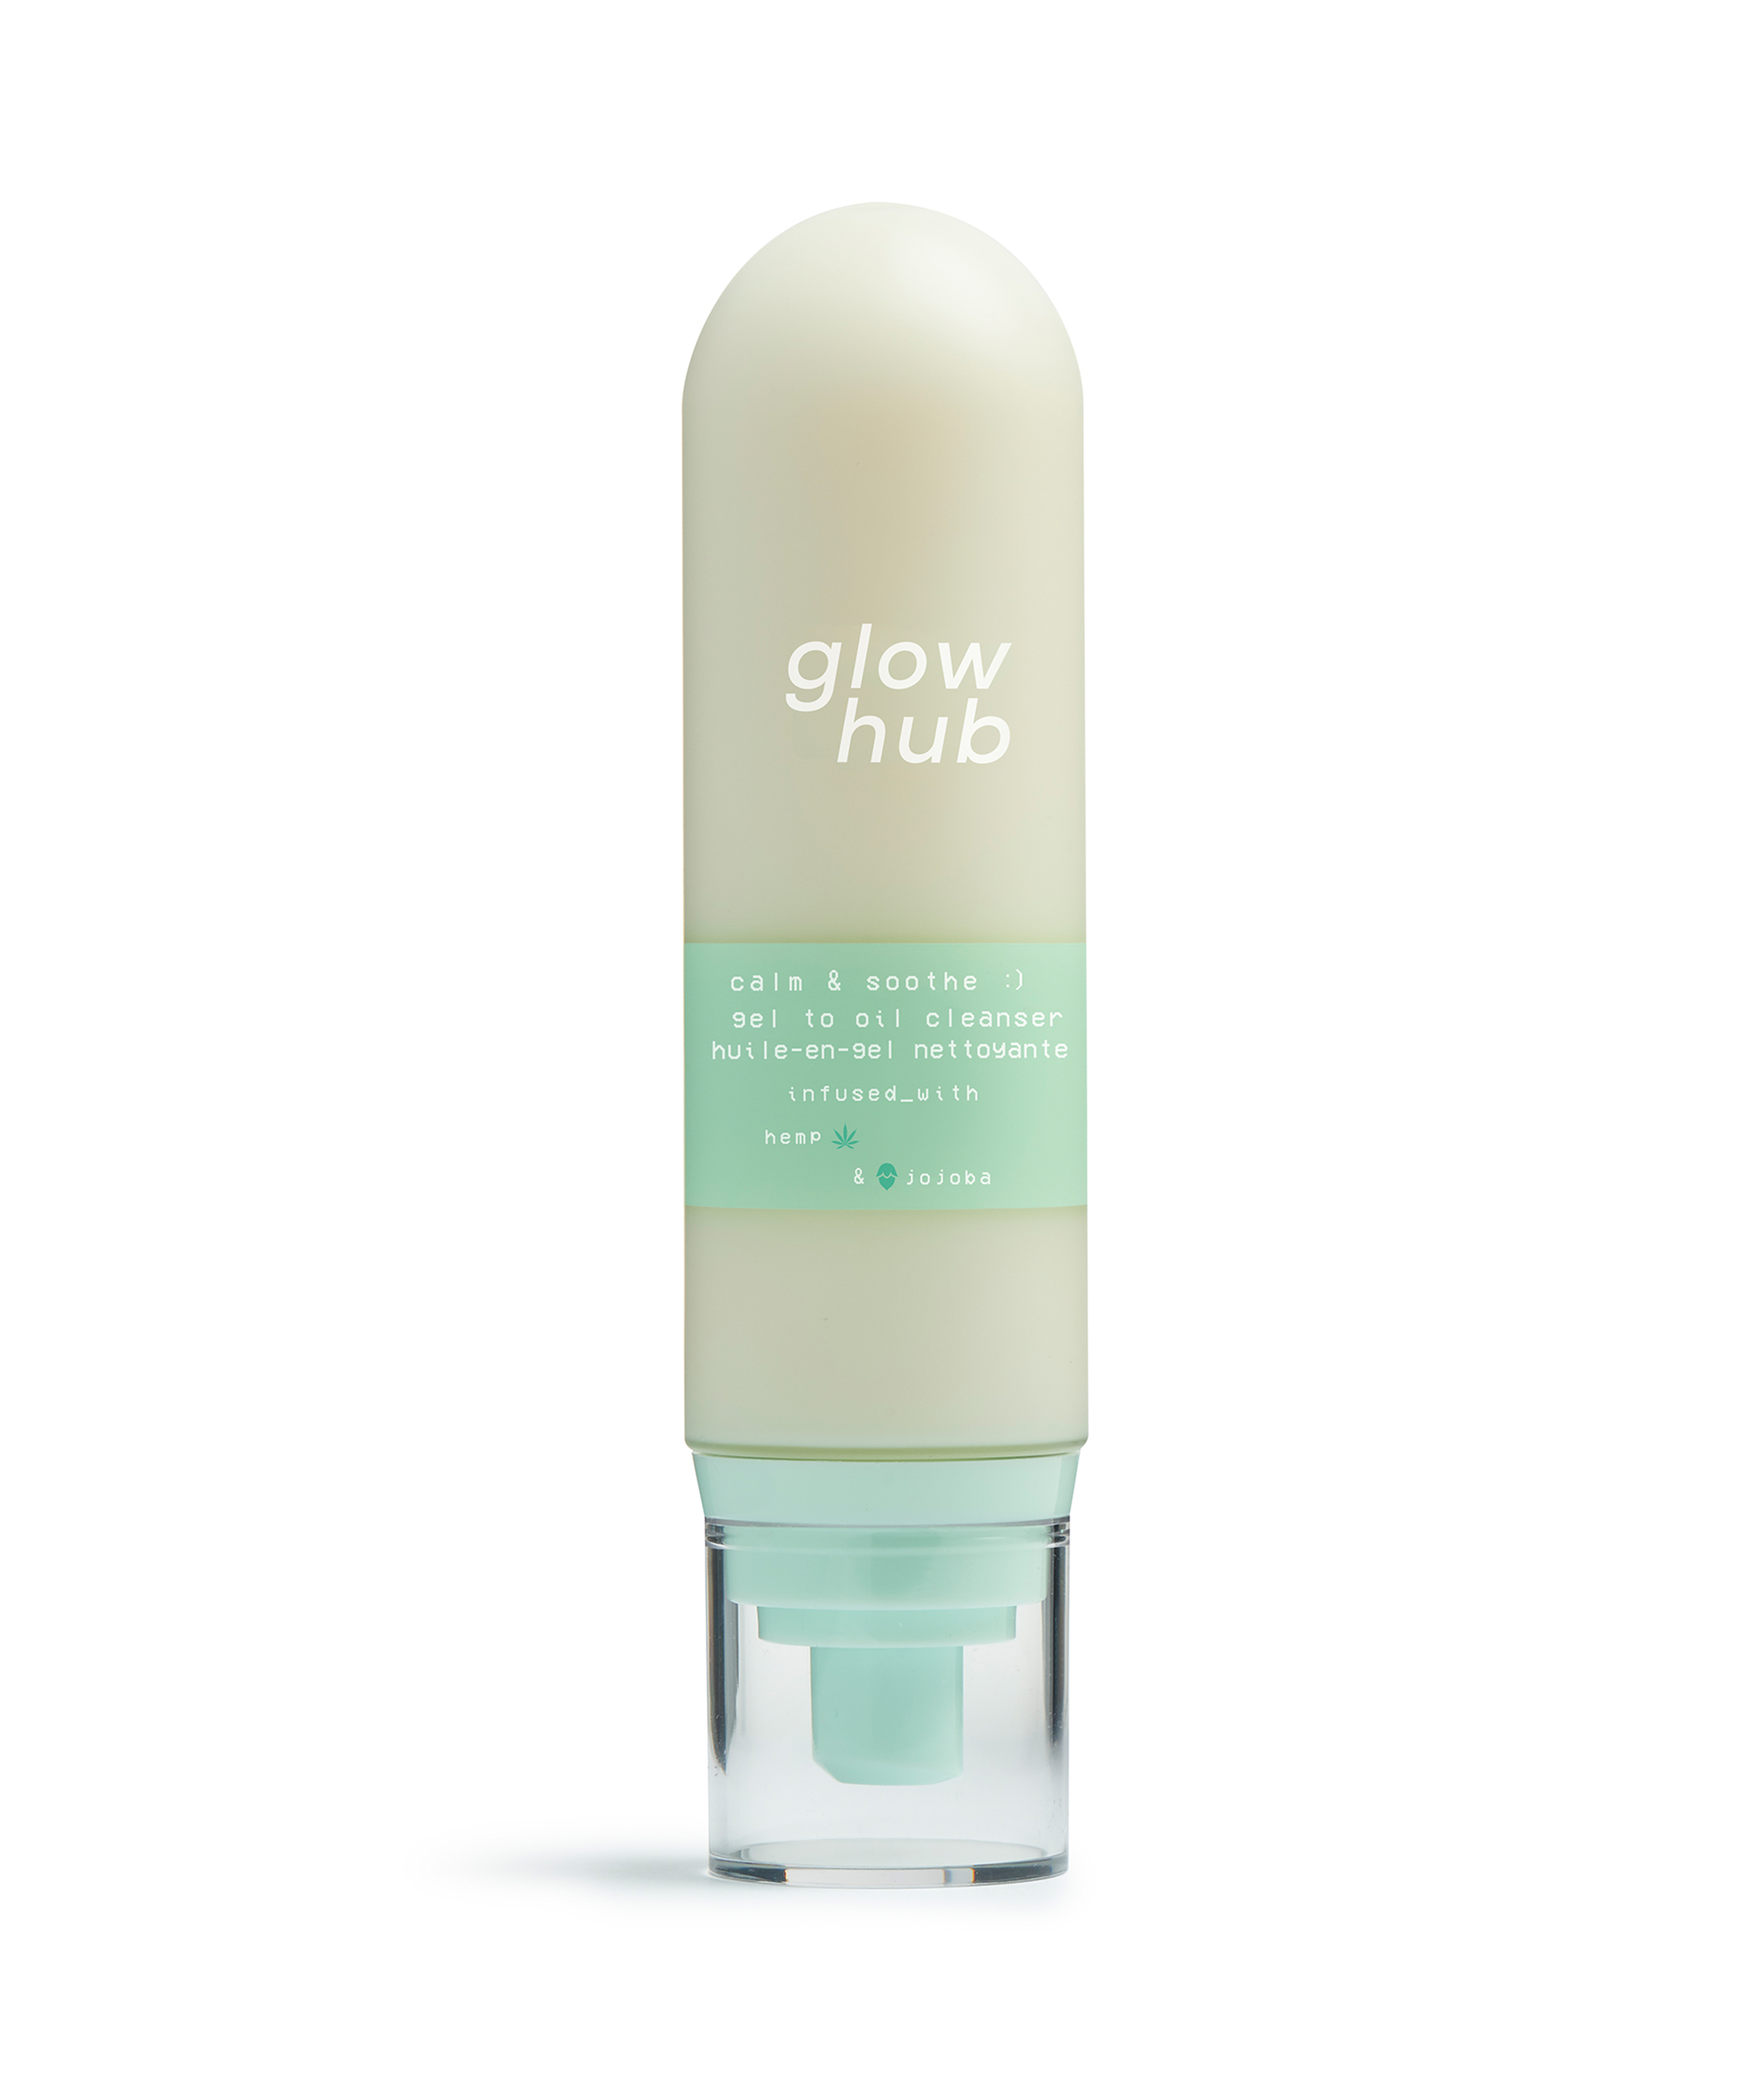 Glow Hub Calm & Soothe Gel To Oil Cleanser